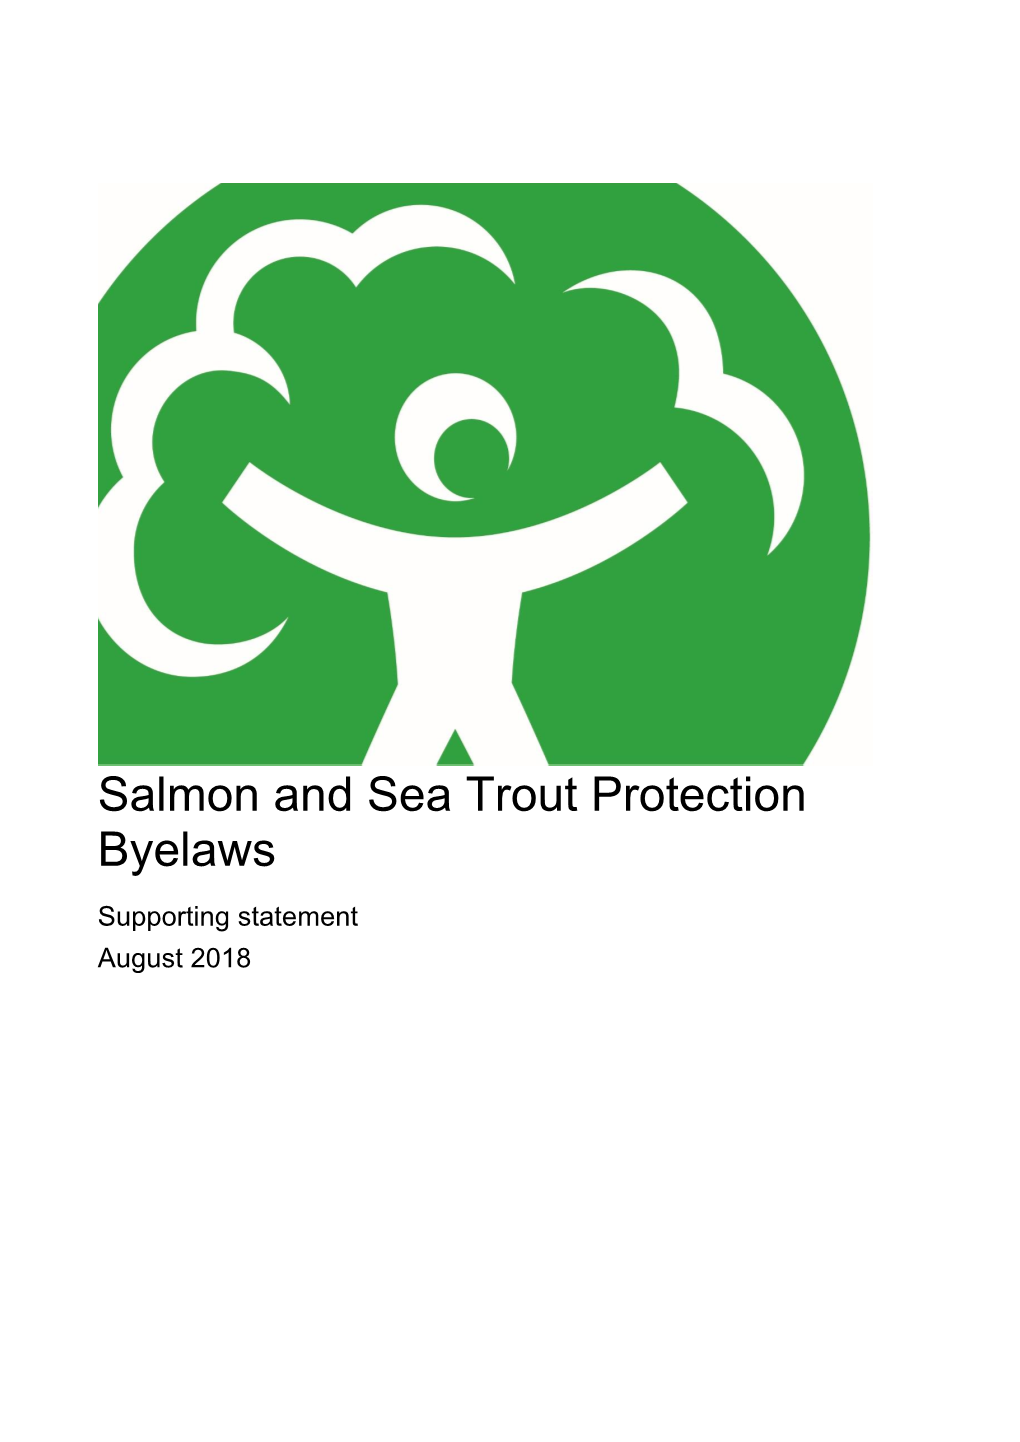 Salmon and Sea Trout Protection Byelaws